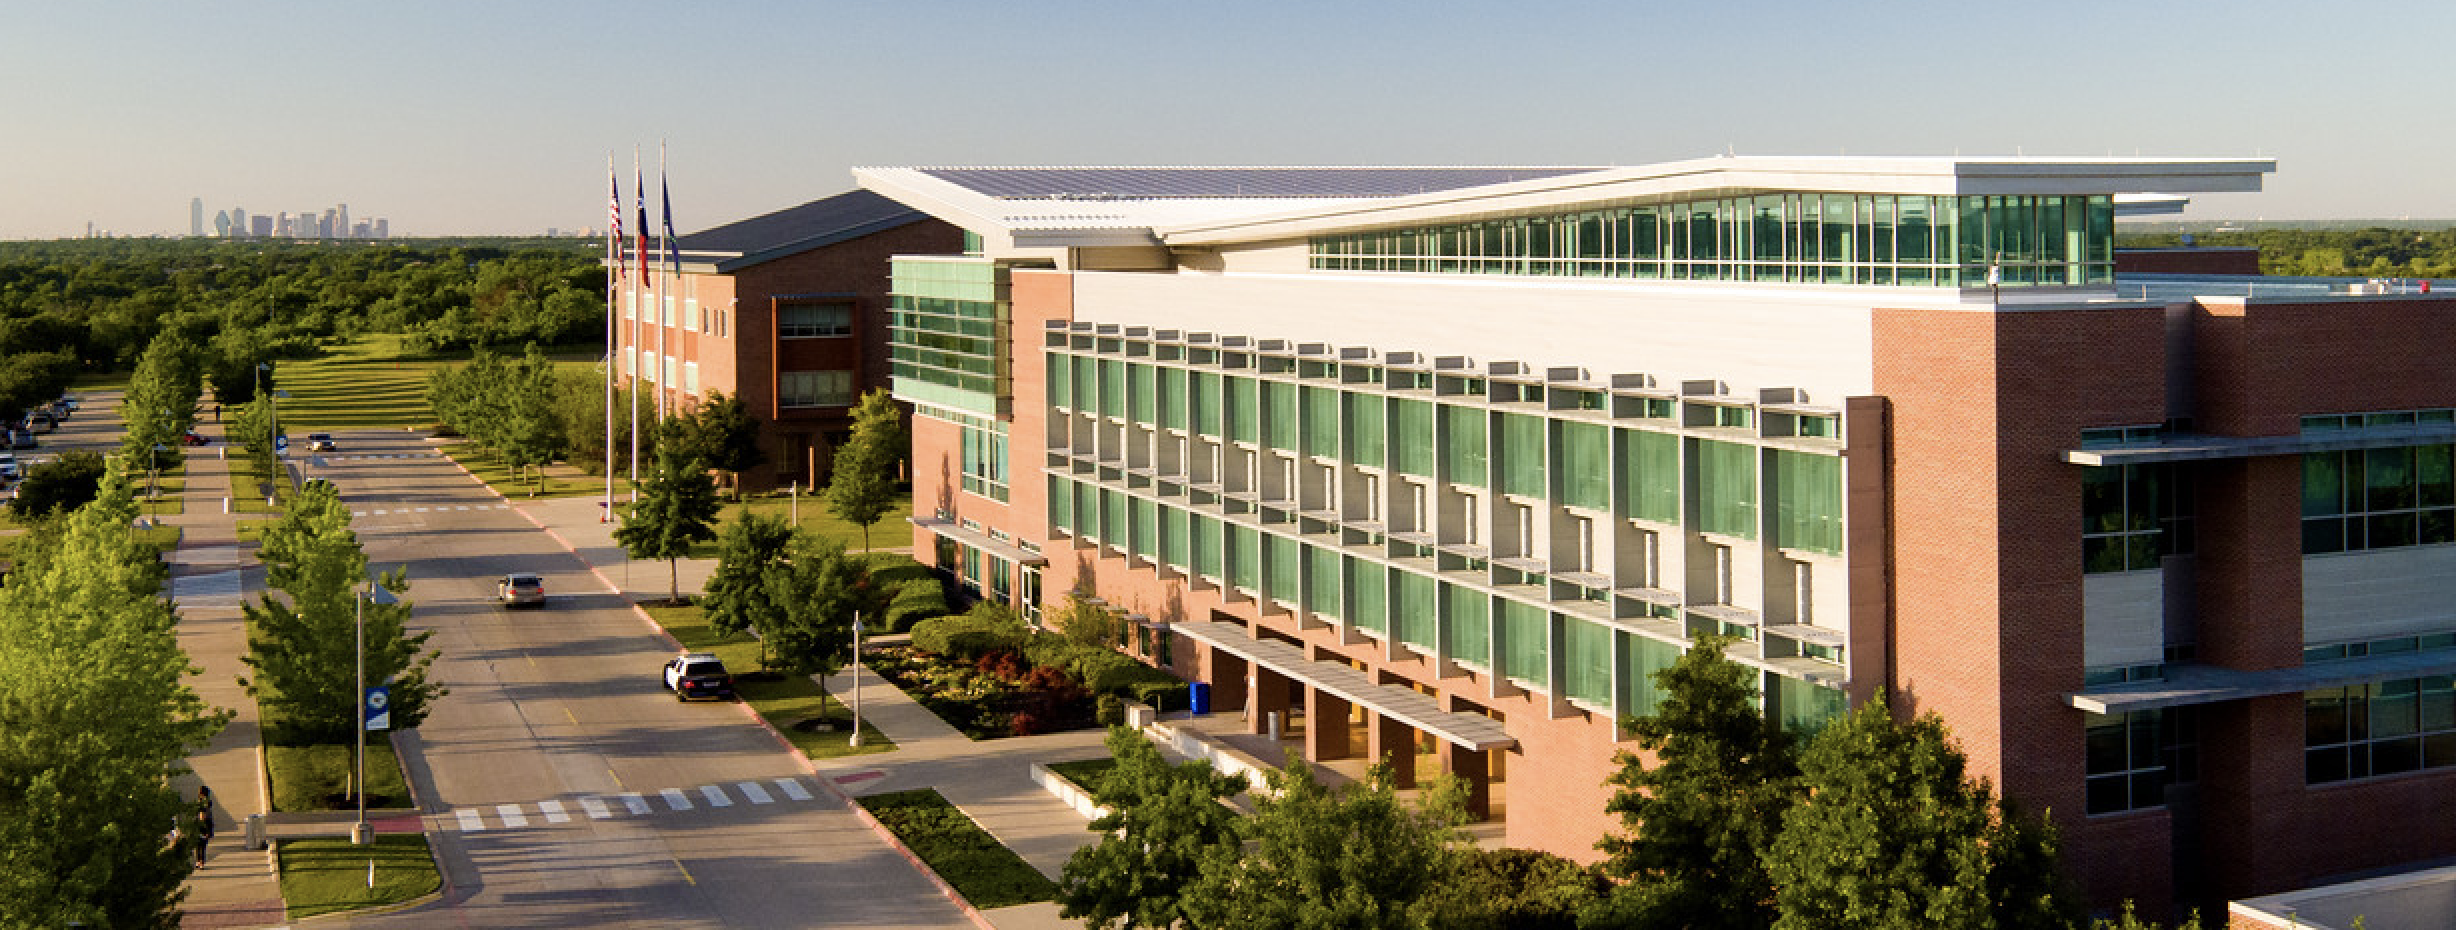 Image of UNT Dallas Campus with Dallas skyline in the distance